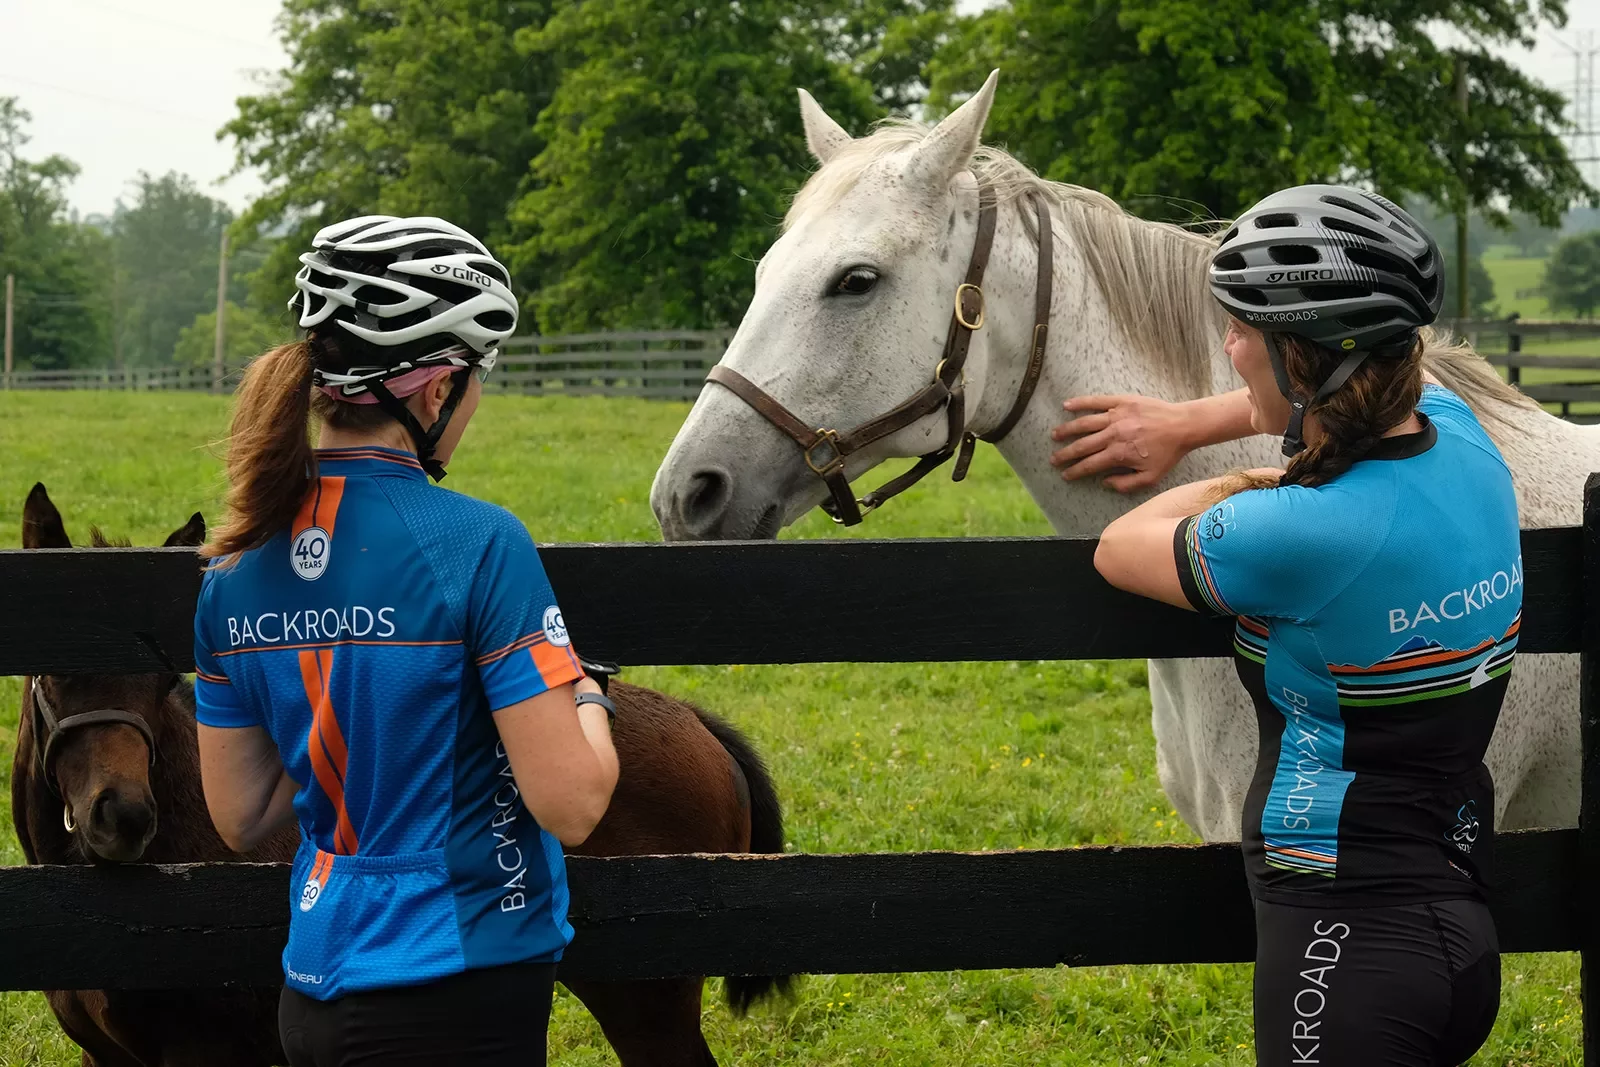 Two guests in bike gear petting white horse.